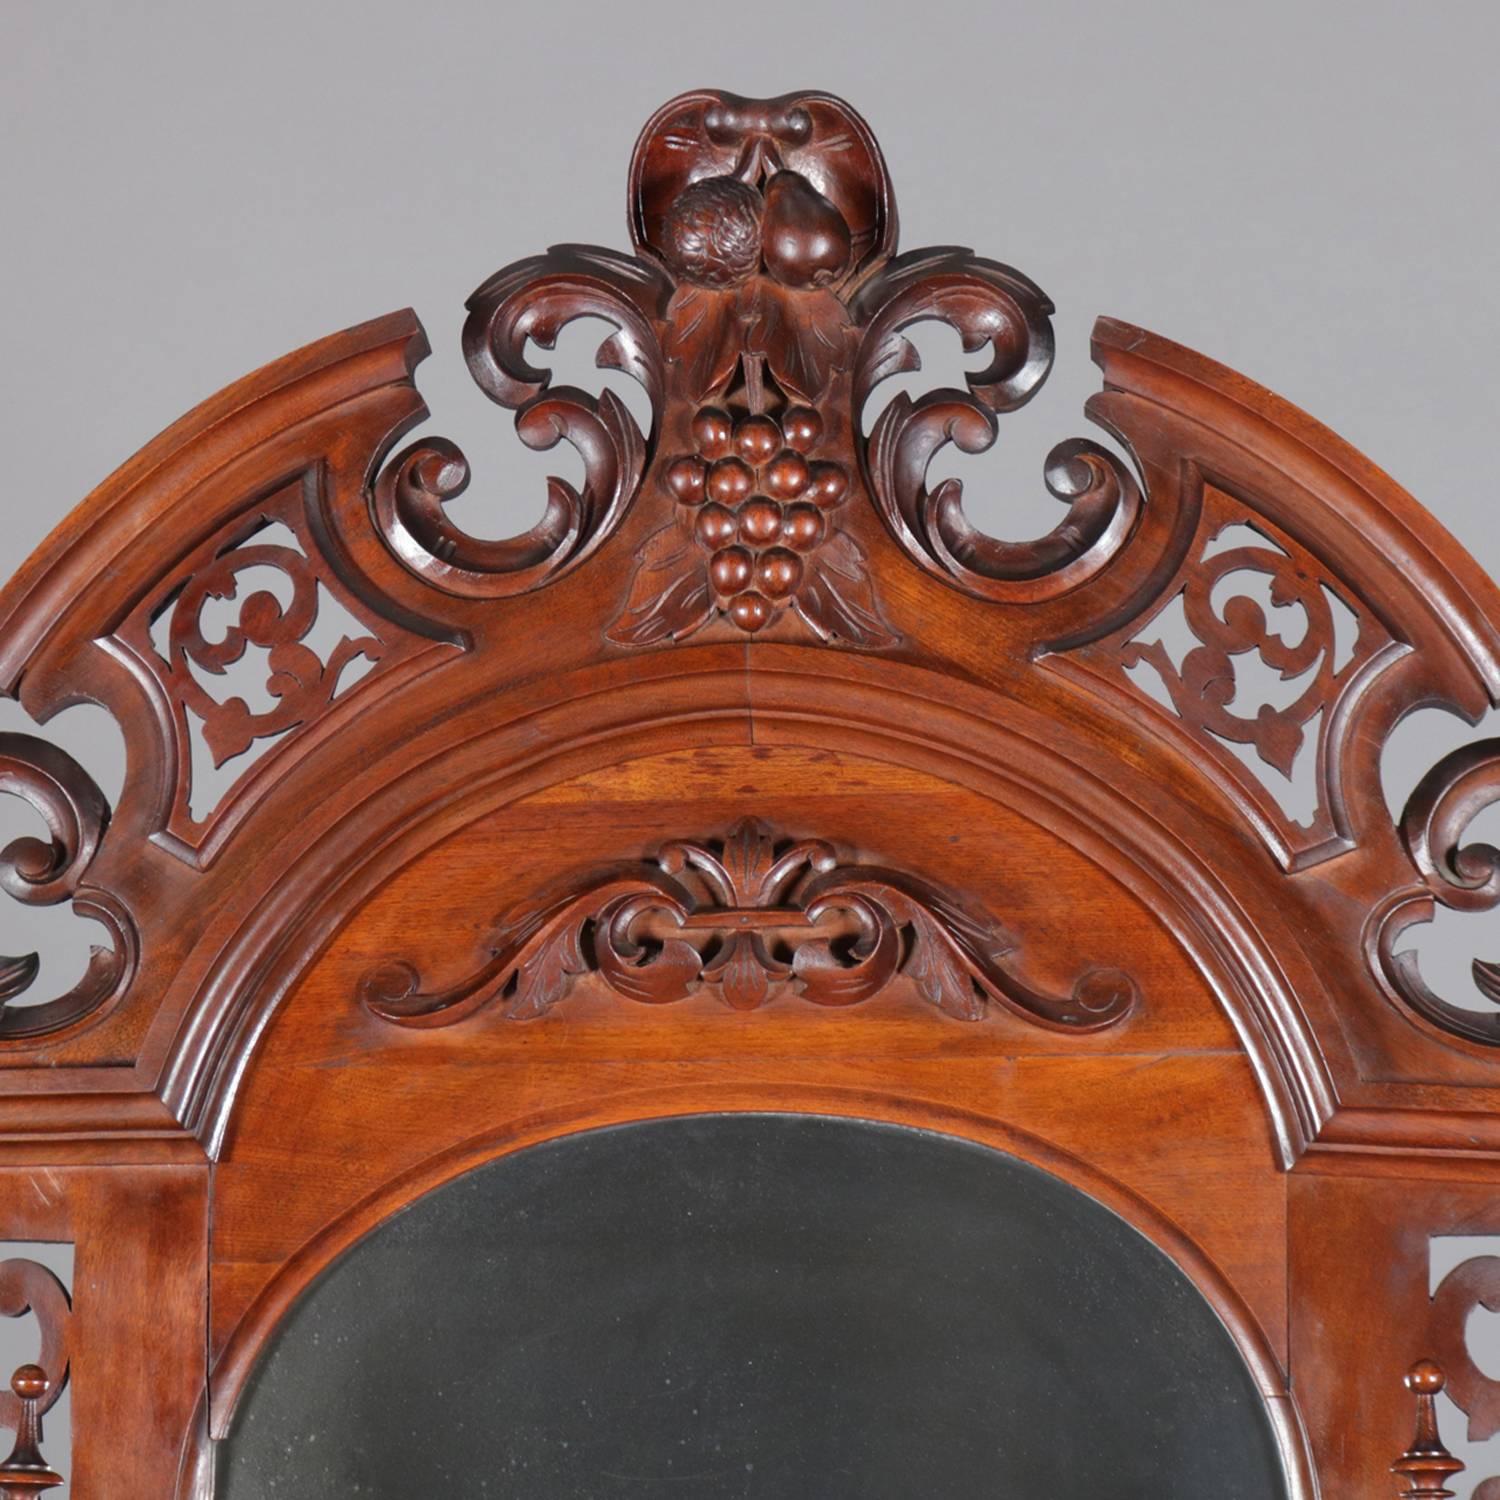 Victorian carved walnut étagère hall pier mirror feature carved walnut frame with pierced foliate and scroll broken arch crest with central fruit carved cartouche, graduated side display shelves and marble platform above single drawer, 19th